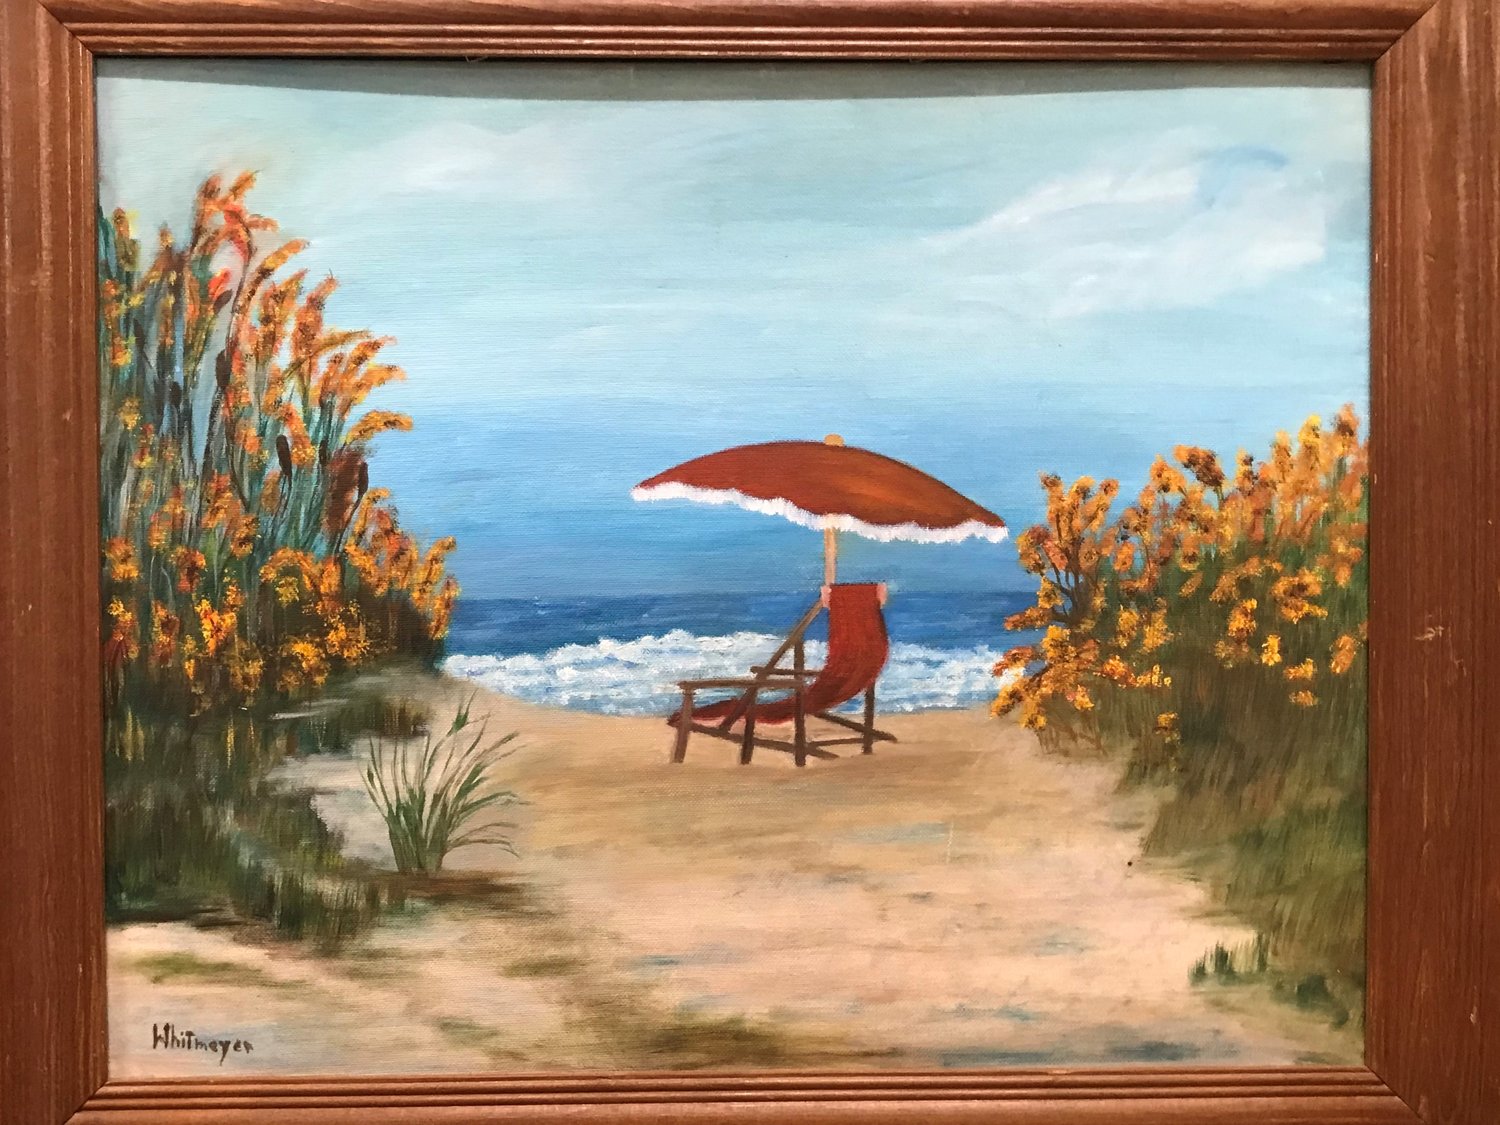 AGNES WHITMEYER — An oil painting of a beach scene by artist Agnes Whitmeyer is one of four prizes up for raffle for the Canastota Public Library's "Show Your Home a Little Love" fundraiser. Tickets are on sale until Feb. 14.